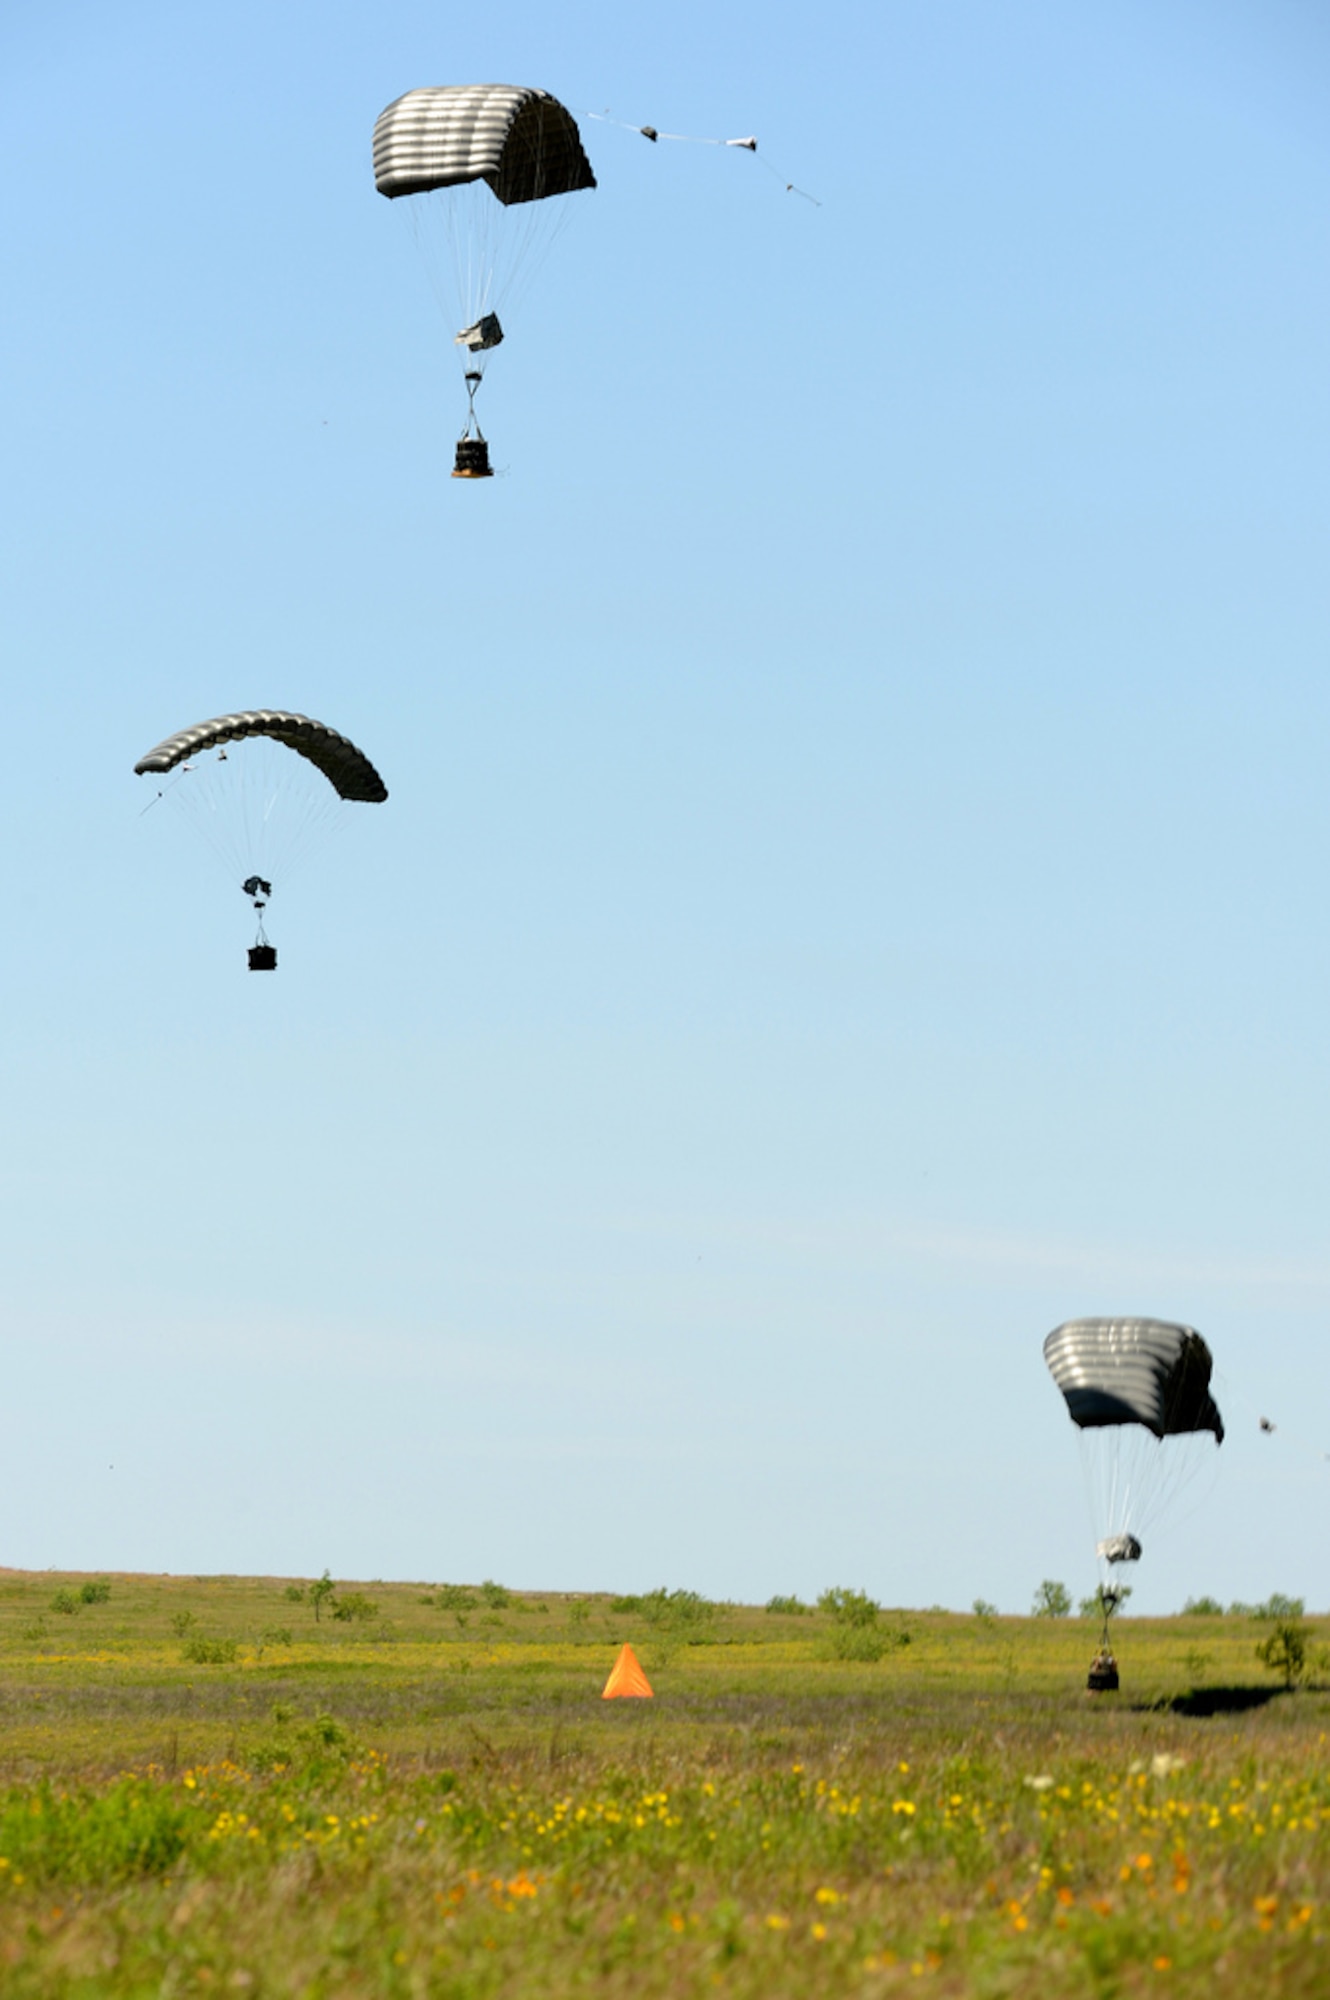 Joint Precision Airdrop System (JPADS) bundles land close to the intended target during a training exercise Tuesday, April 24, at the Antelope Drop Zone at Fort Hood. JPADS is an airdrop system that uses Global Positioning Satellite, steerable parachutes and an onboard computer to steer loads to a designated point of impact on a drop zone. (Photo by Daniel Cernero, III Corps and Fort Hood Public Affairs)